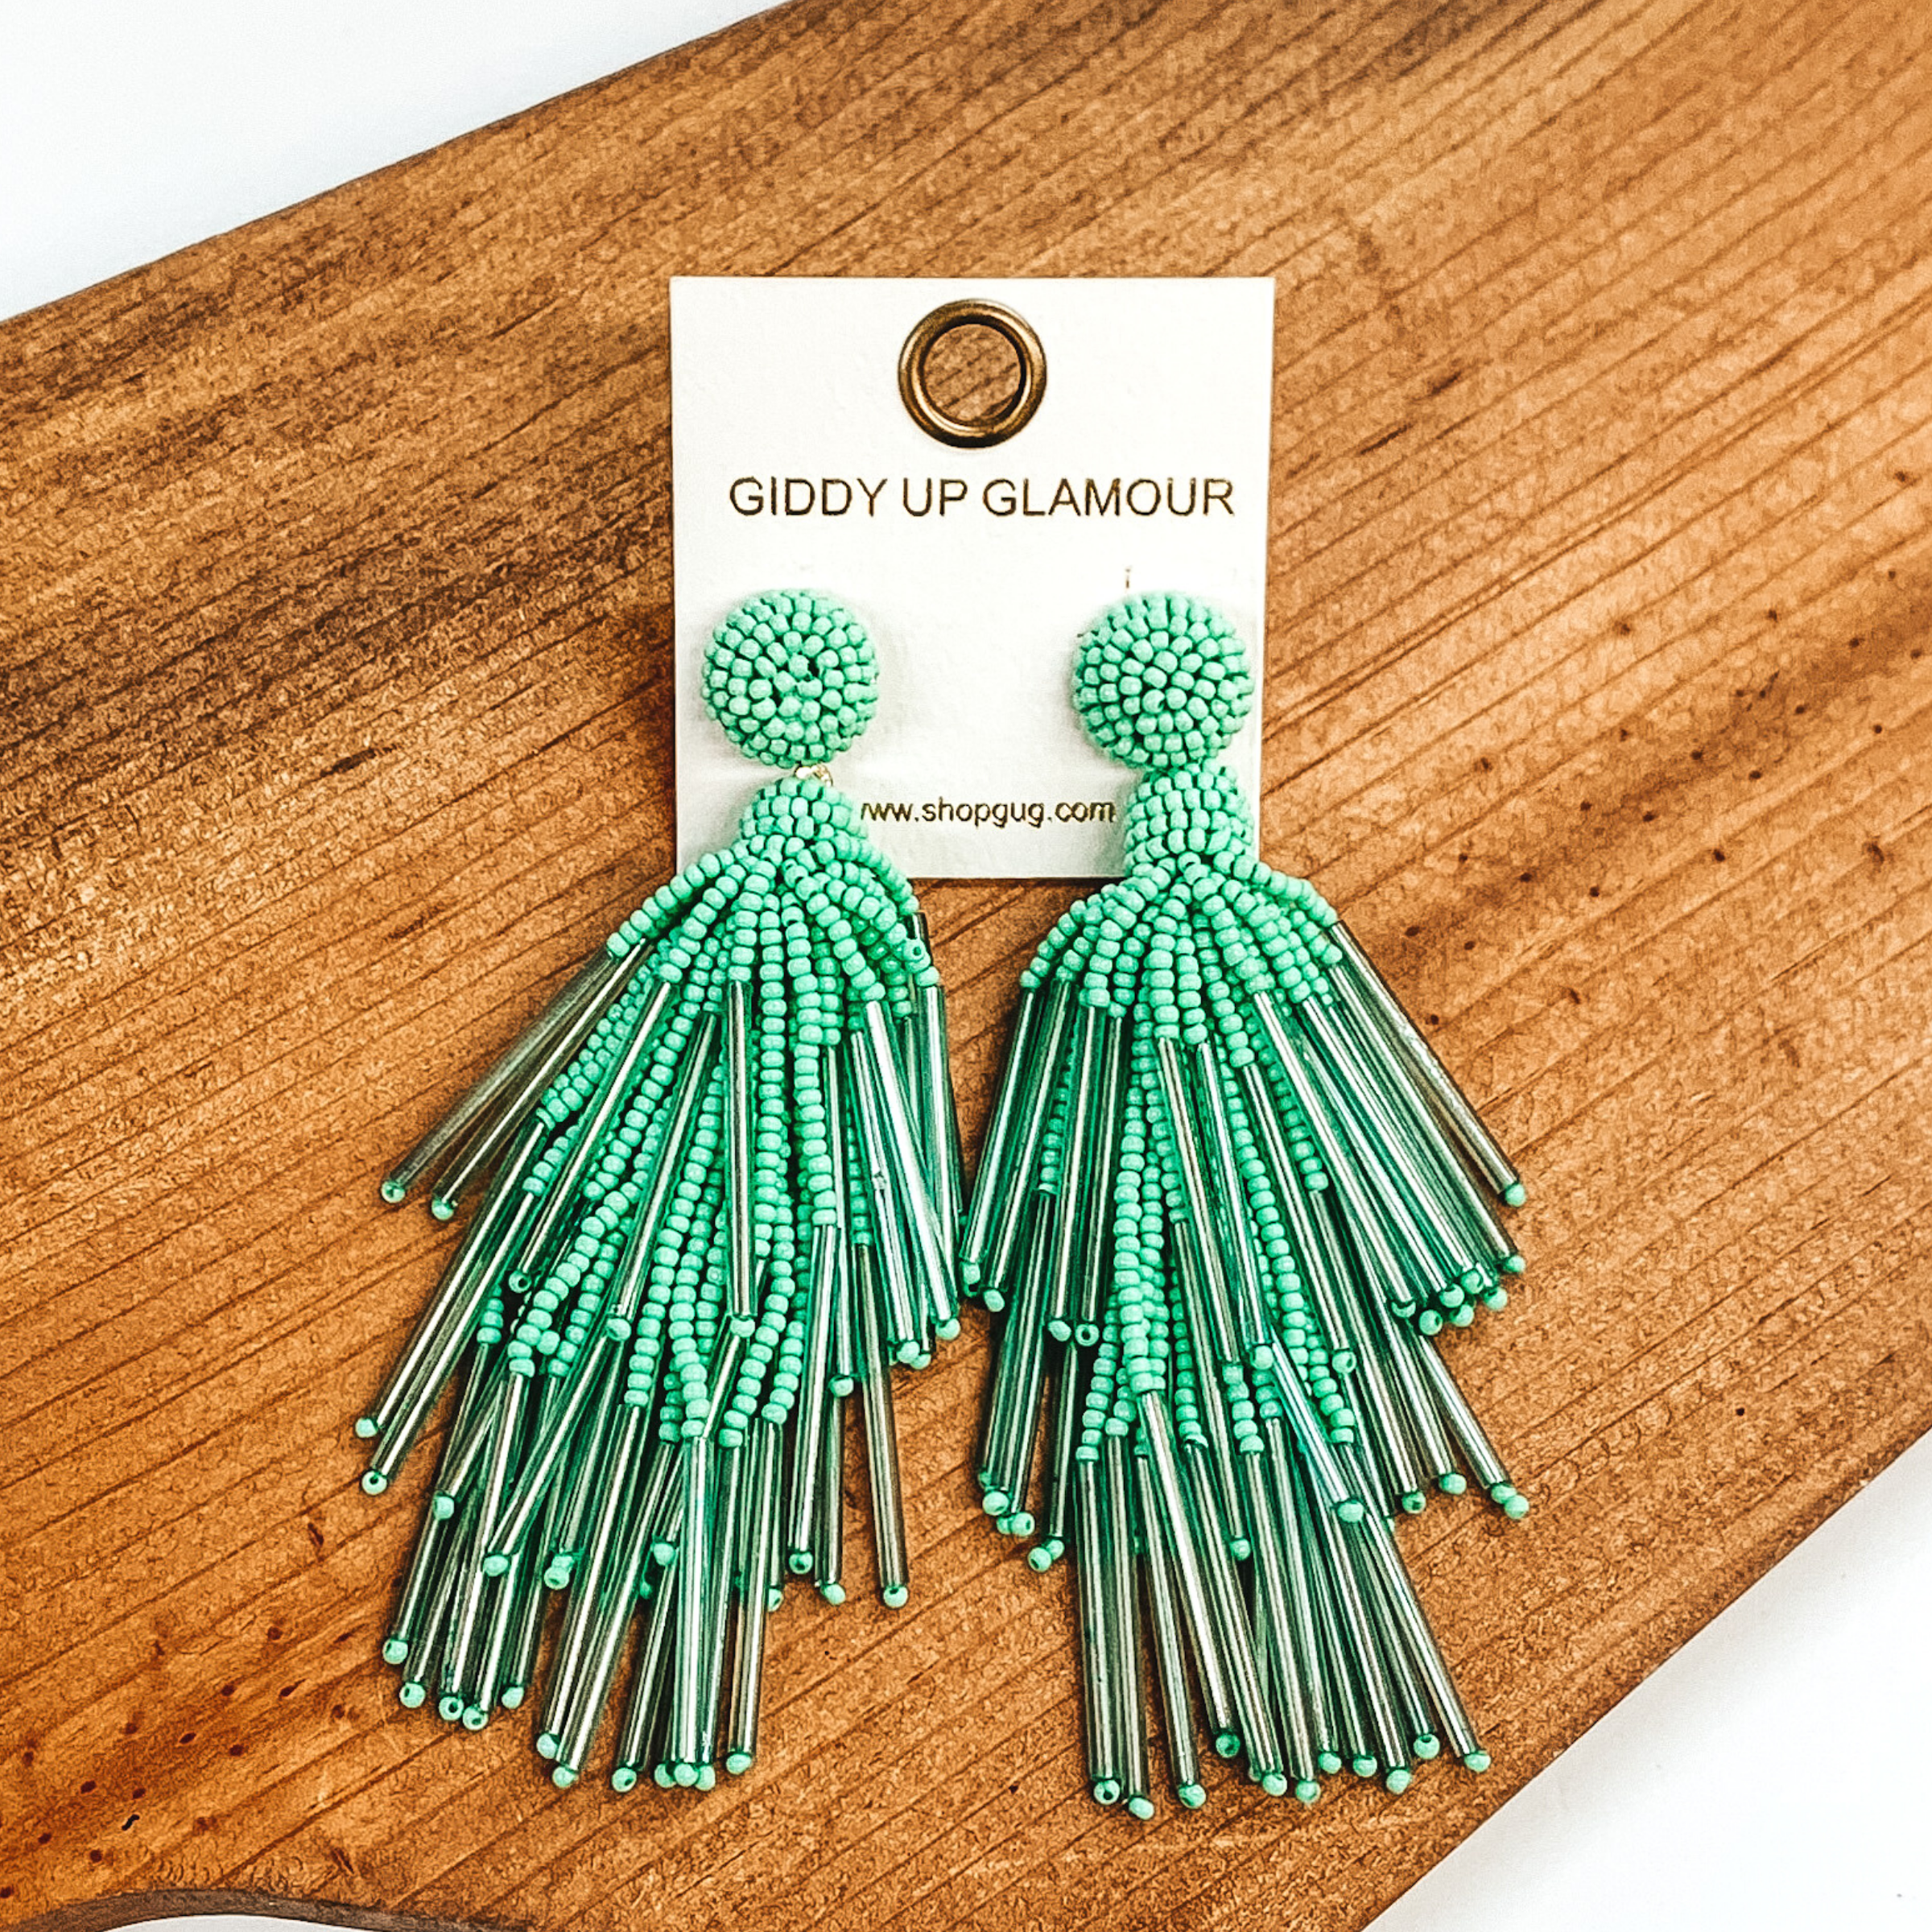 Circle beaded stud earrings with a beaded tassel in mint. These earrings are pictured laying on a brown piece of wood on a white background.